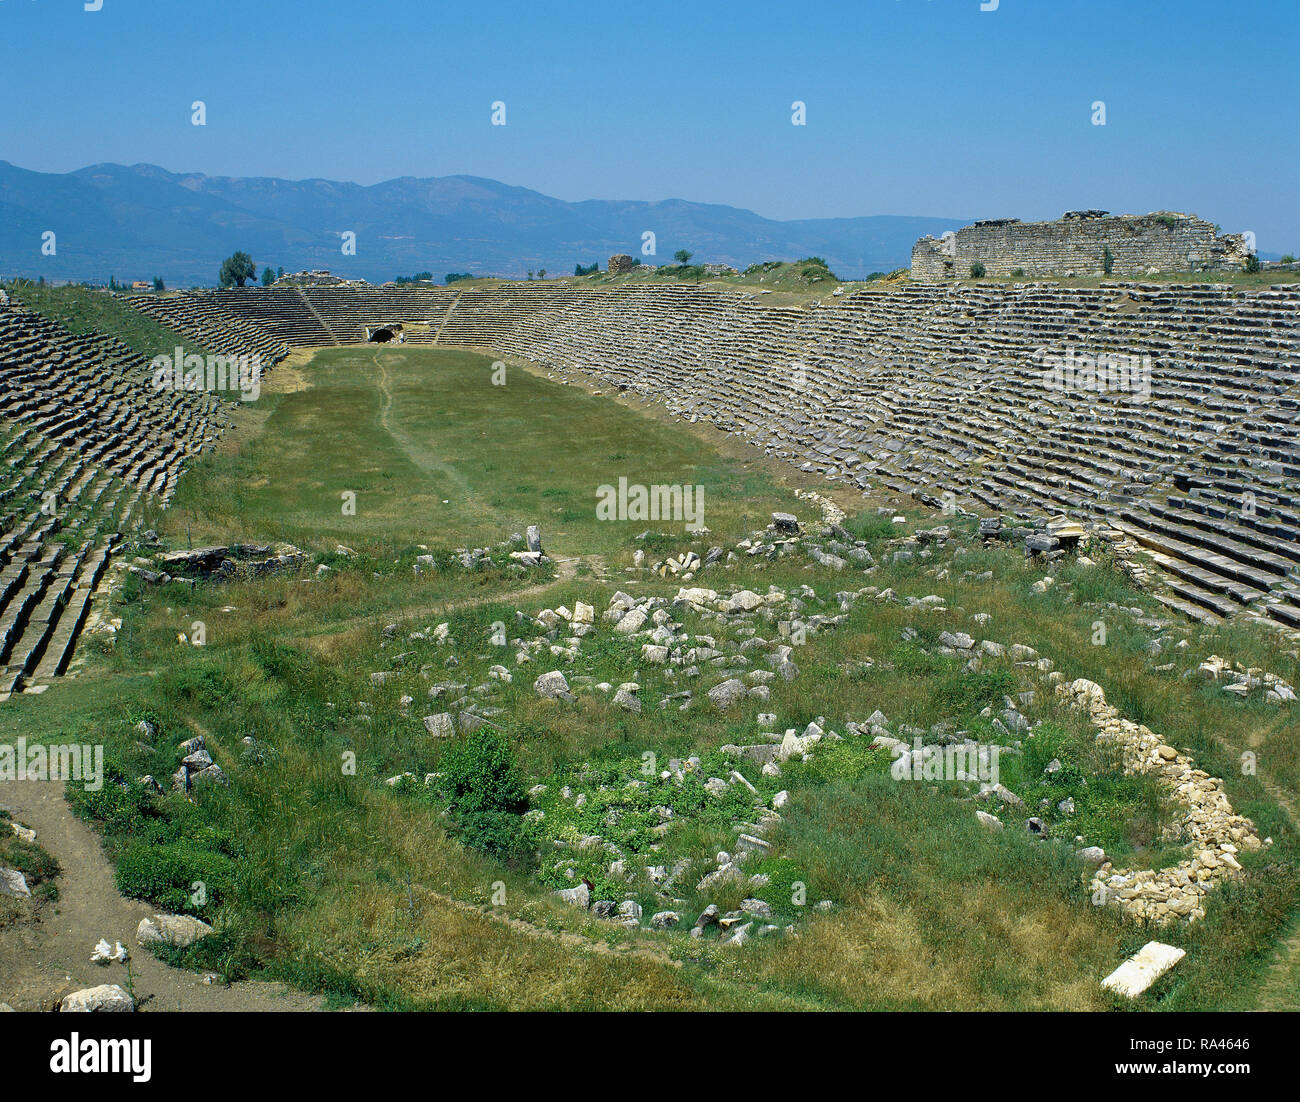 Turkey. Aphrodisias. Ancient Greek Classical city. The Stadium. It was built in the later 1st century AD. Originally designed for athletic contests. Panoramic view. Stock Photo